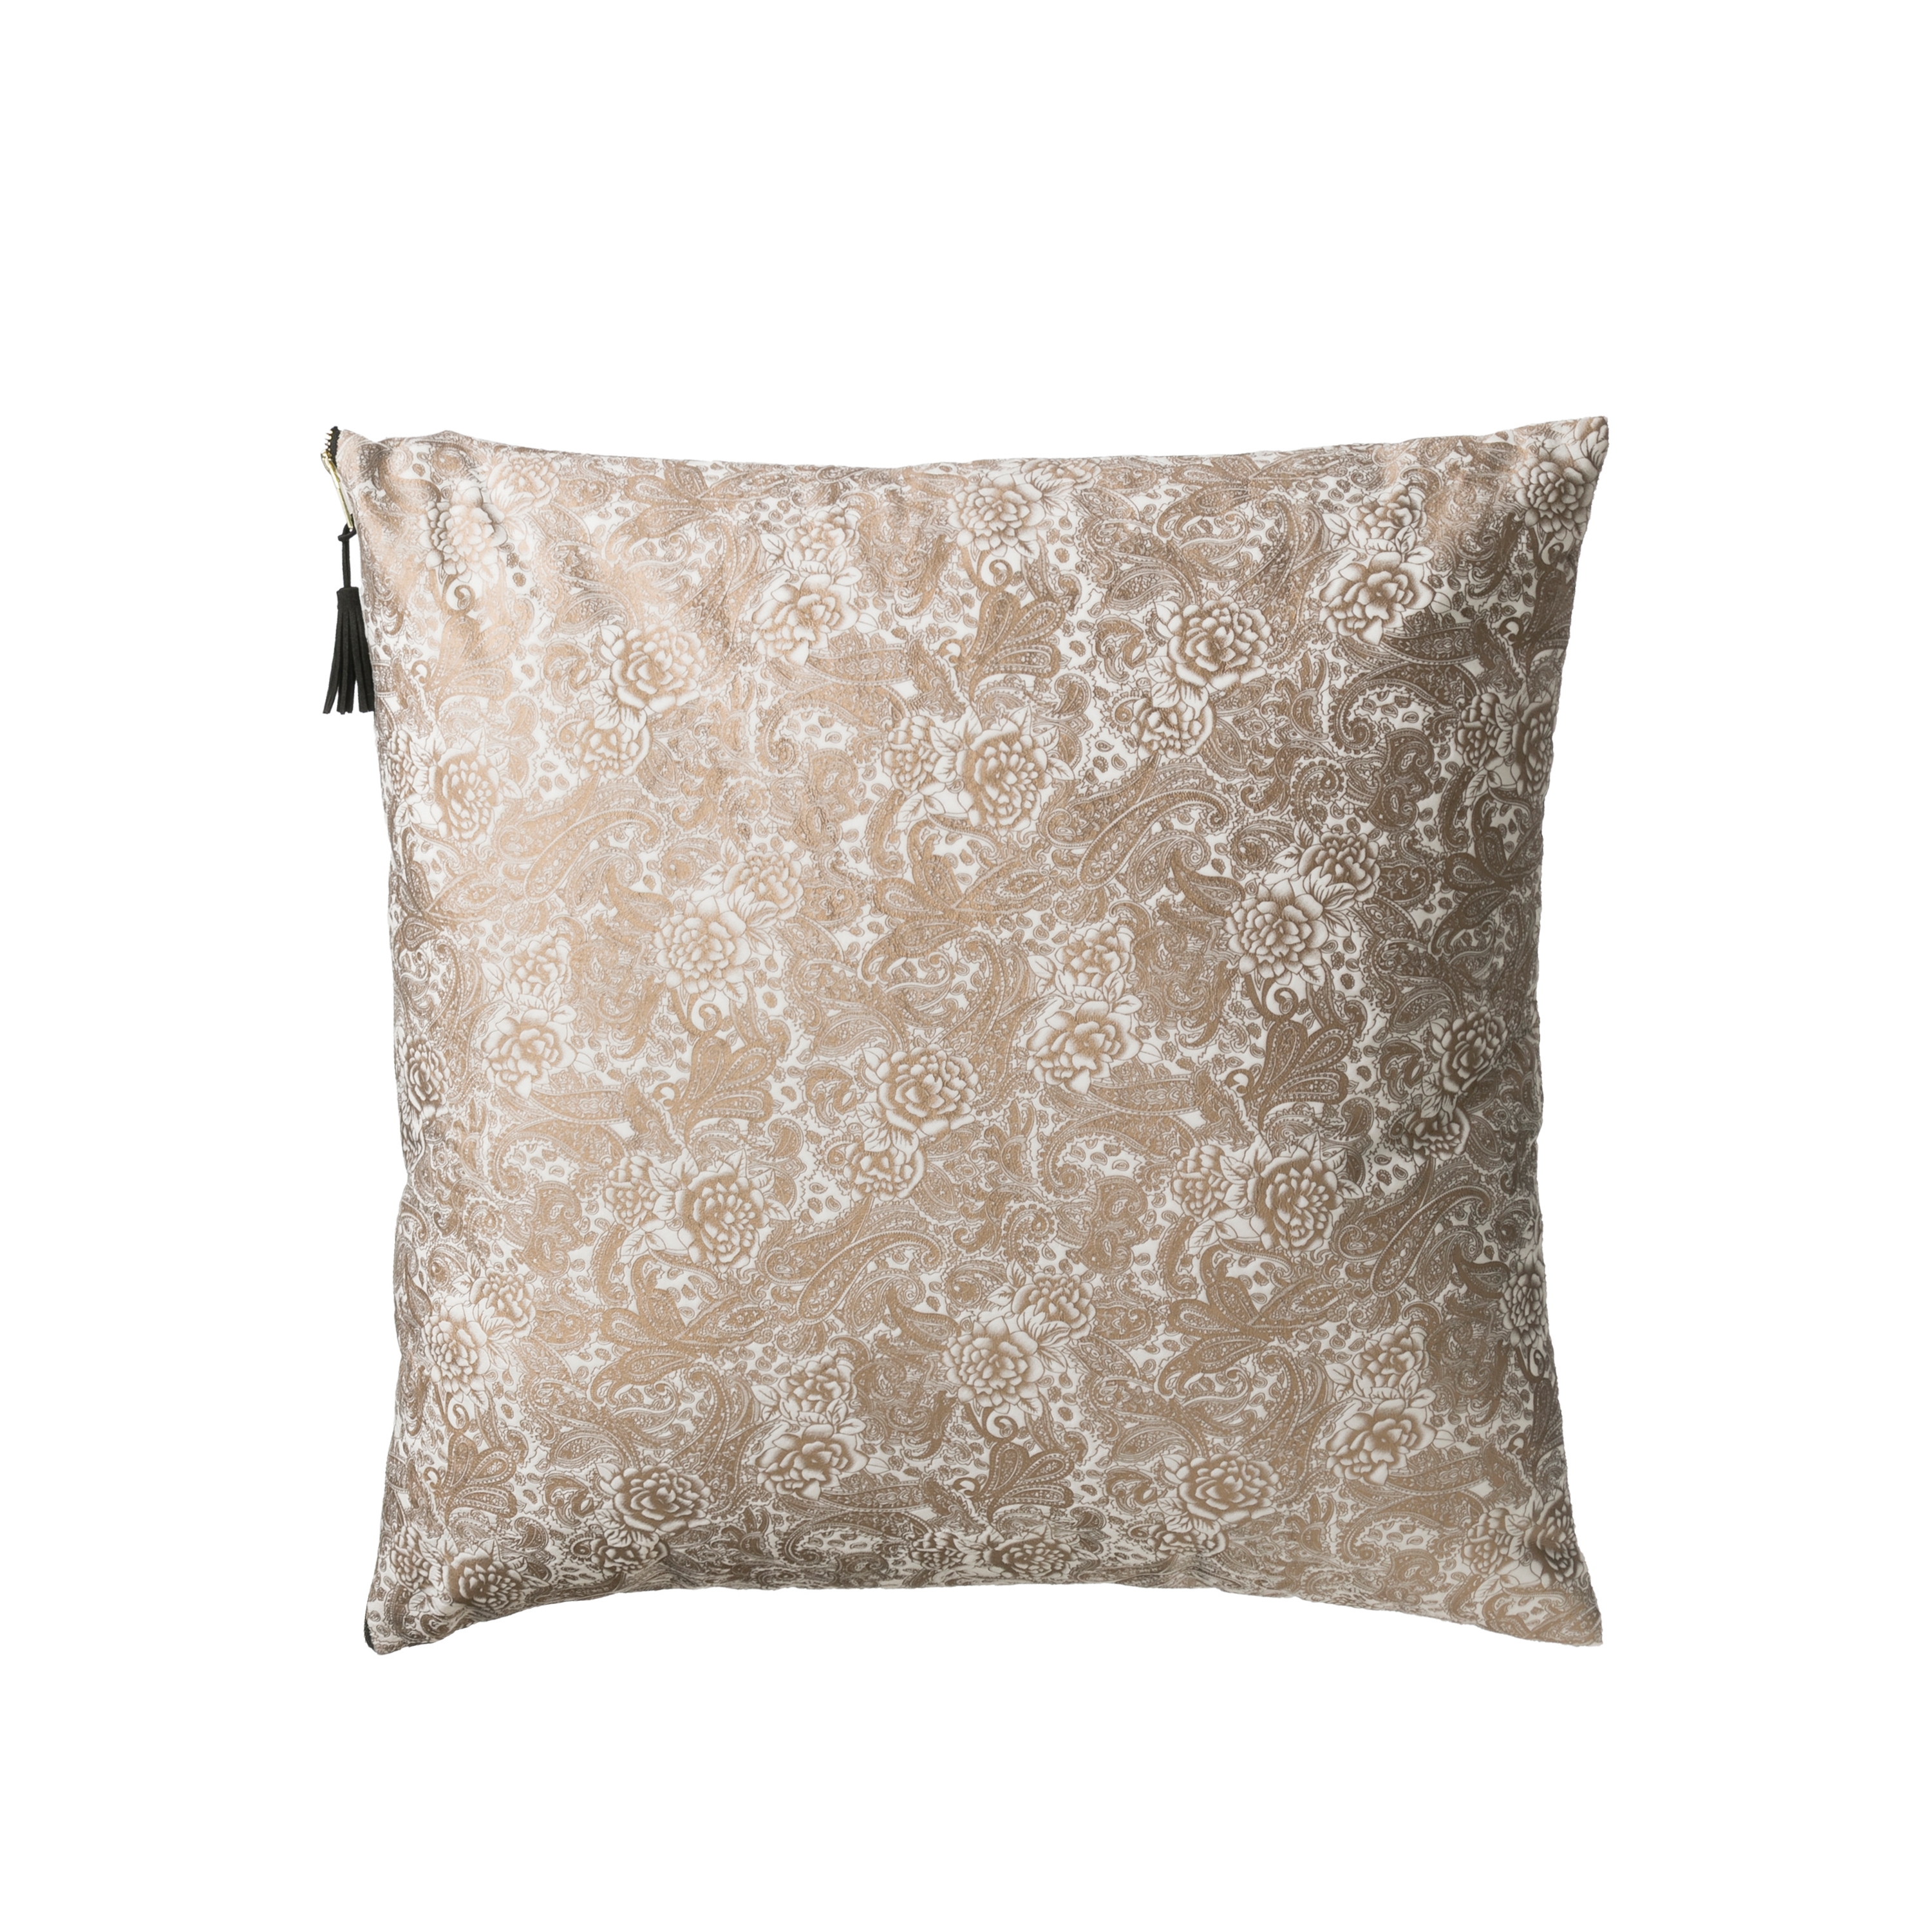 24" Square Polyester Pillow with Floral Tole Pattern & Tassel Accent - Image 0